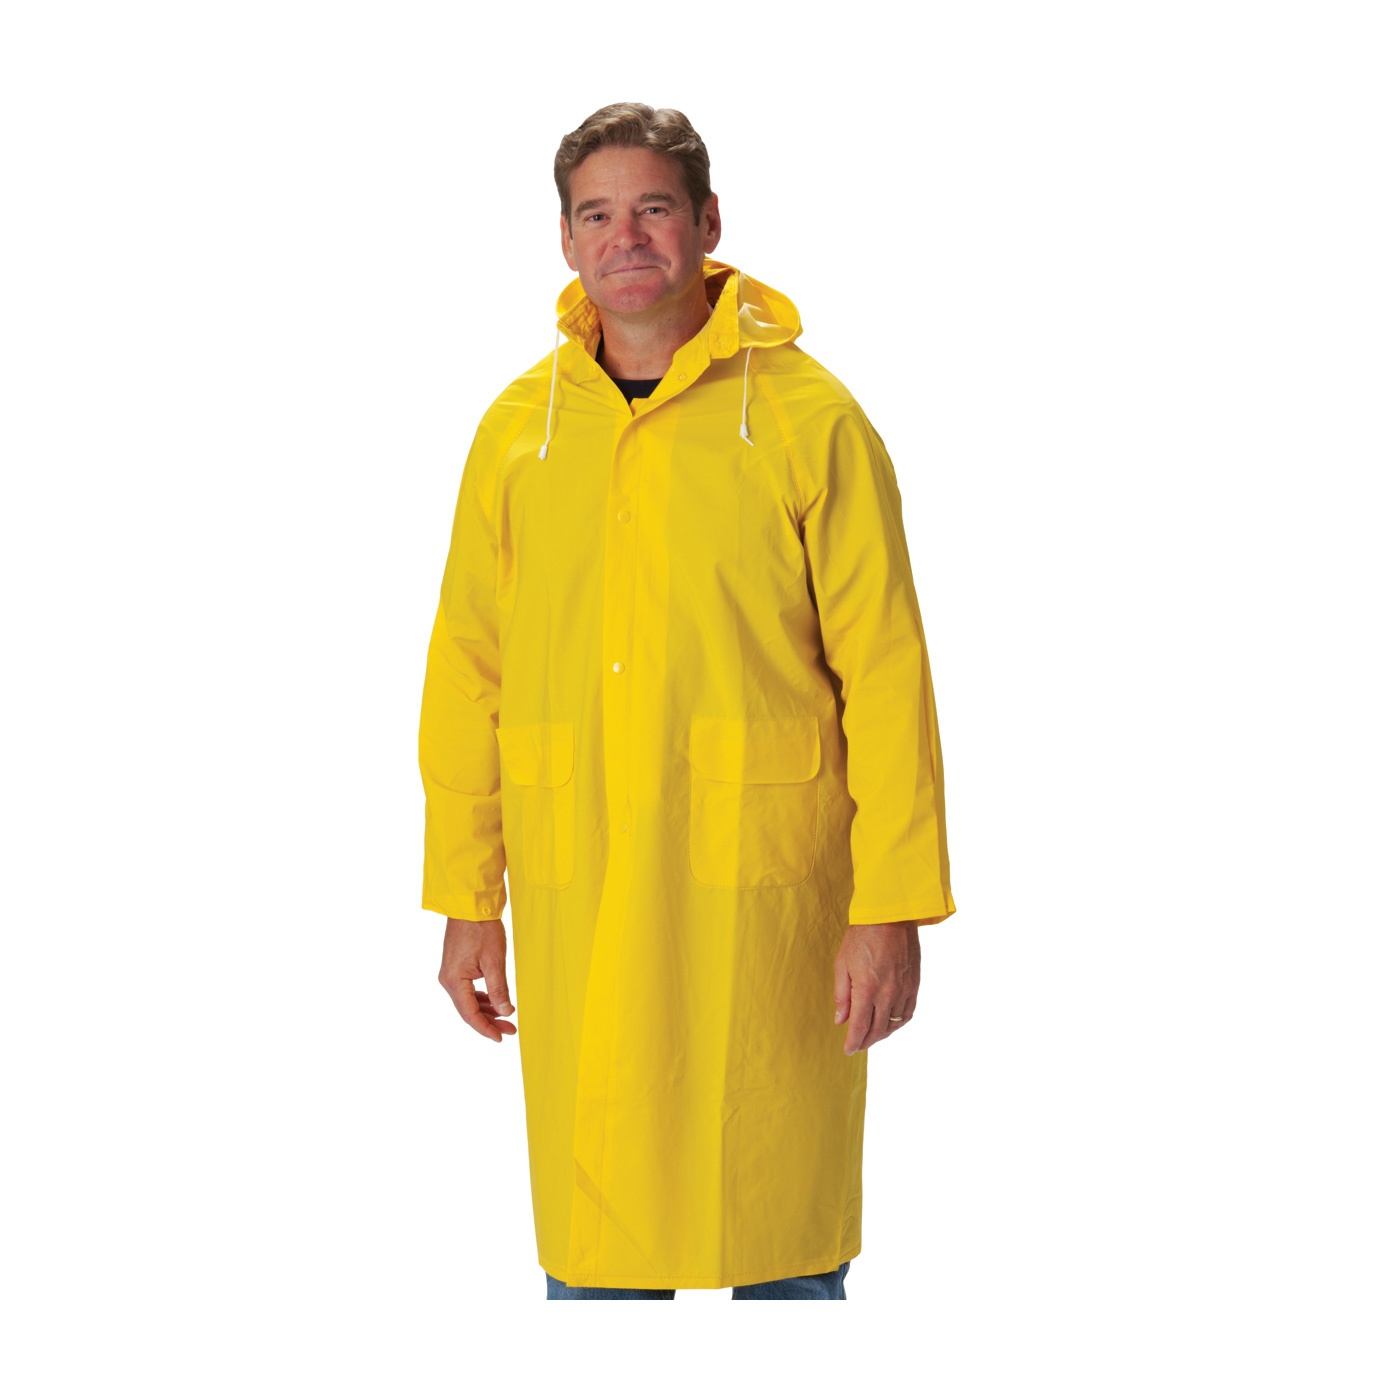 PIP Falcon Base35FR 2 Piece Treated Raincoat from Columbia Safety